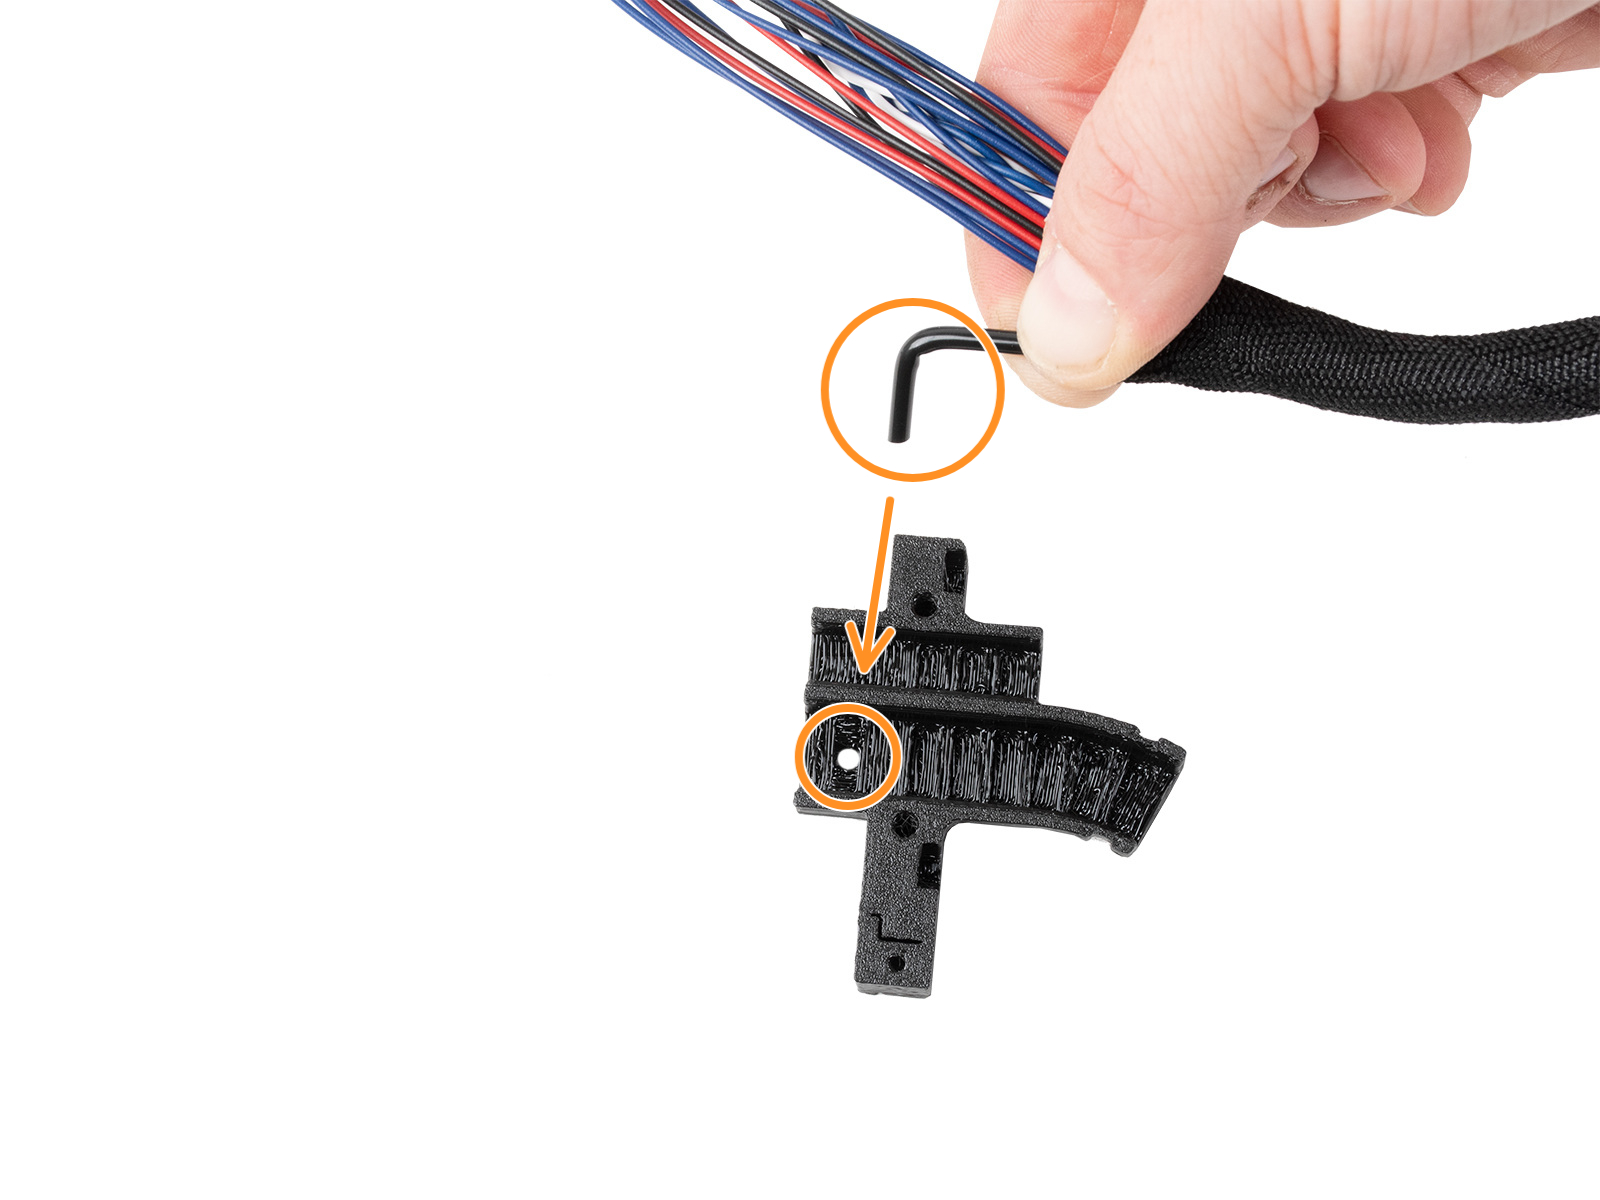 Attaching the Ext-cable-holder